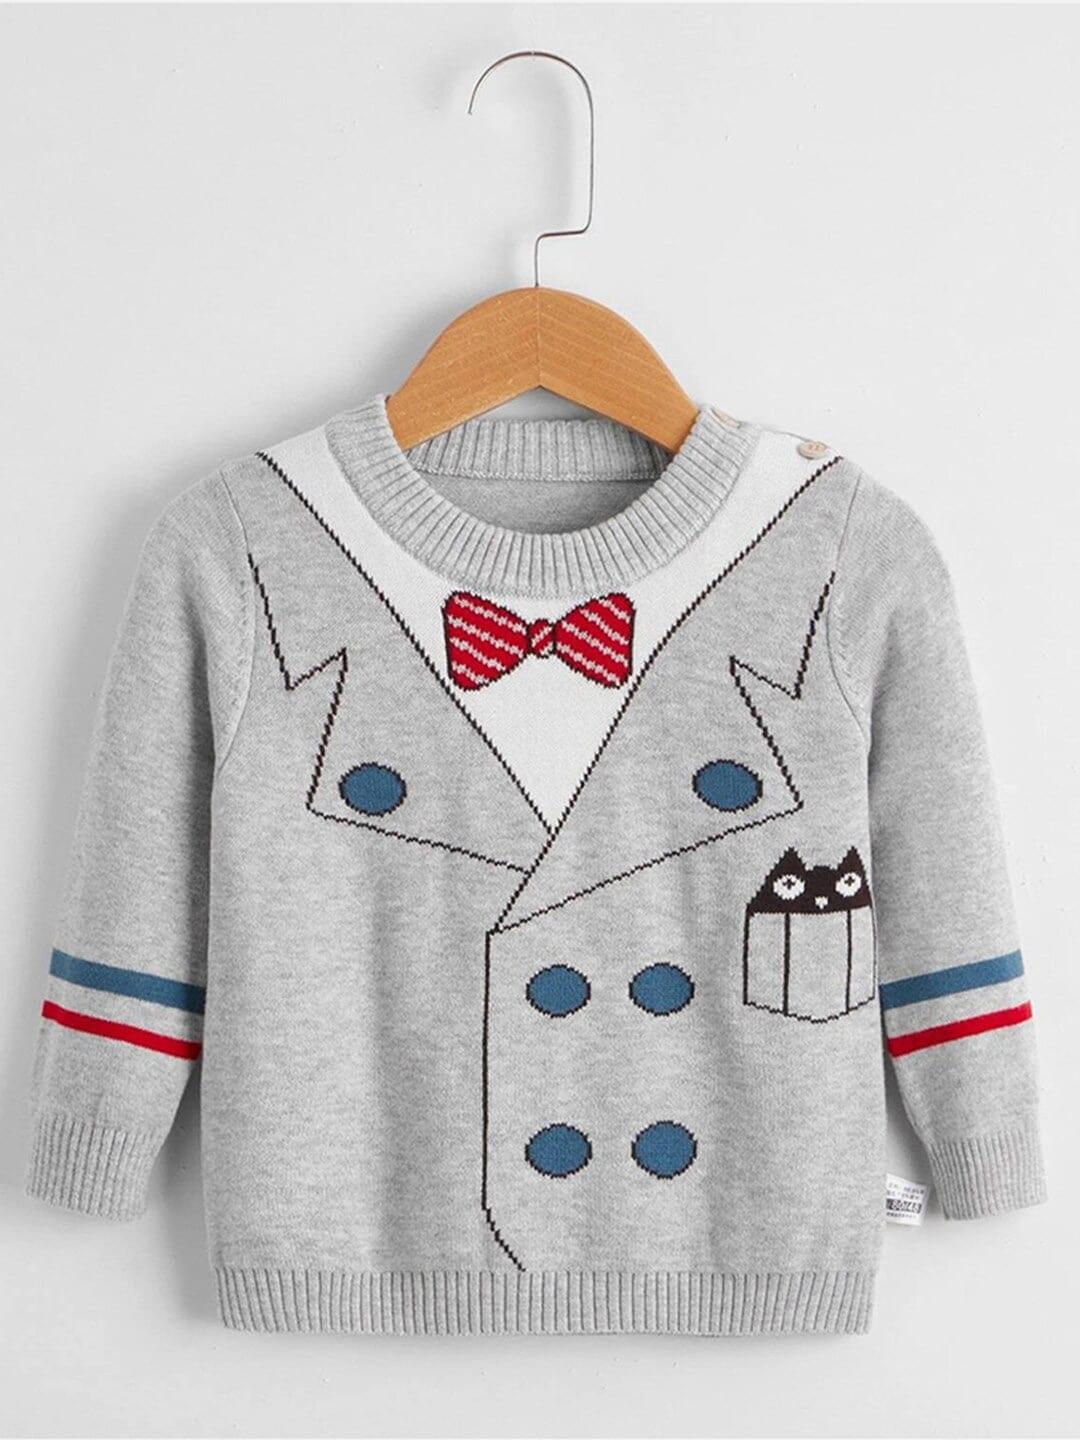 Little Surprise Box LLP Kids Printed Pullover